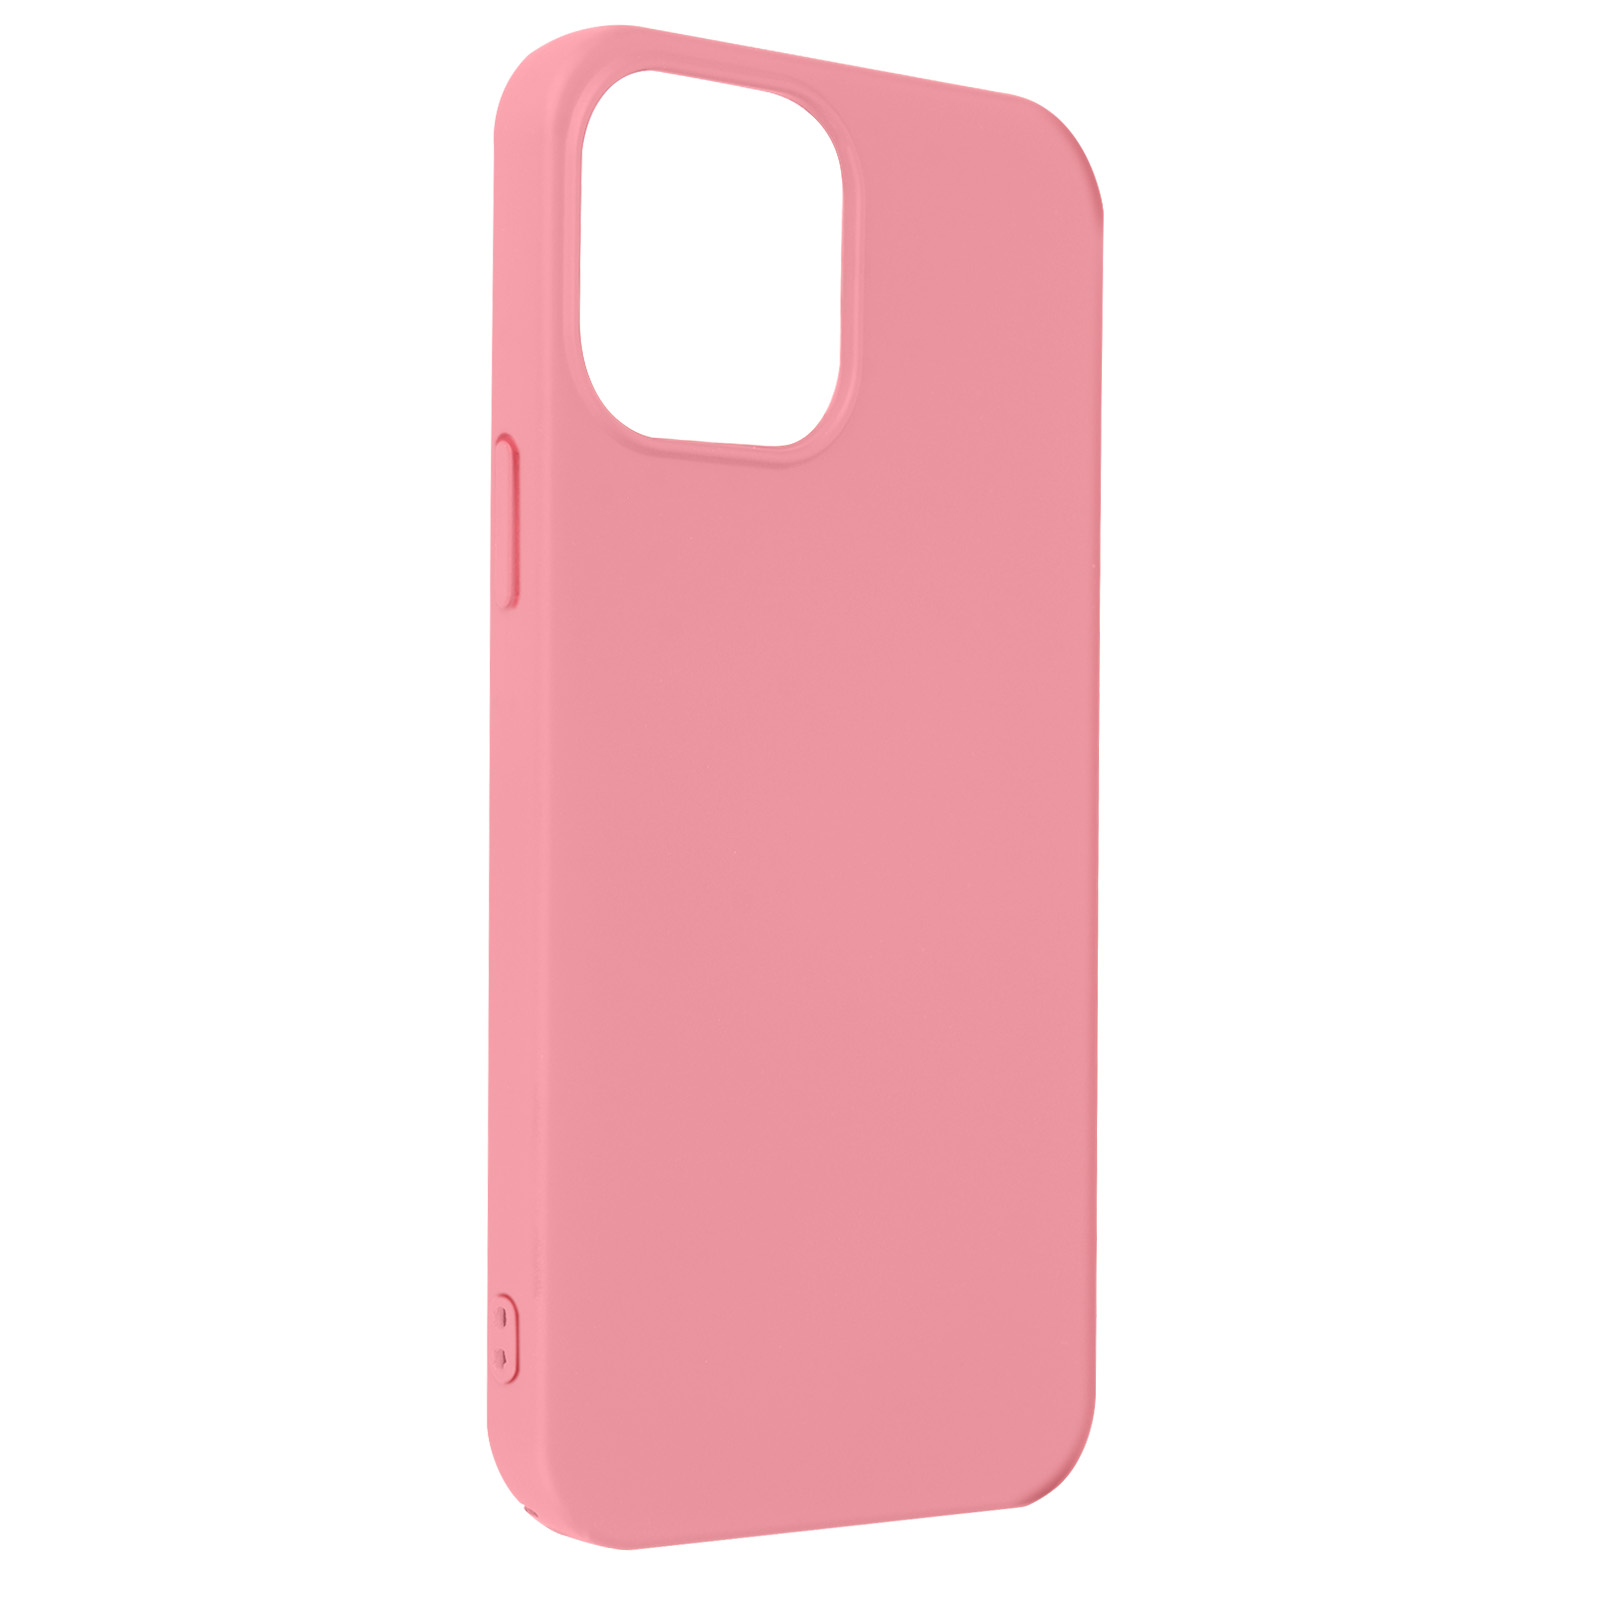 Pro, Backcover, 13 Series, Apple, Fast AVIZAR iPhone Rosa